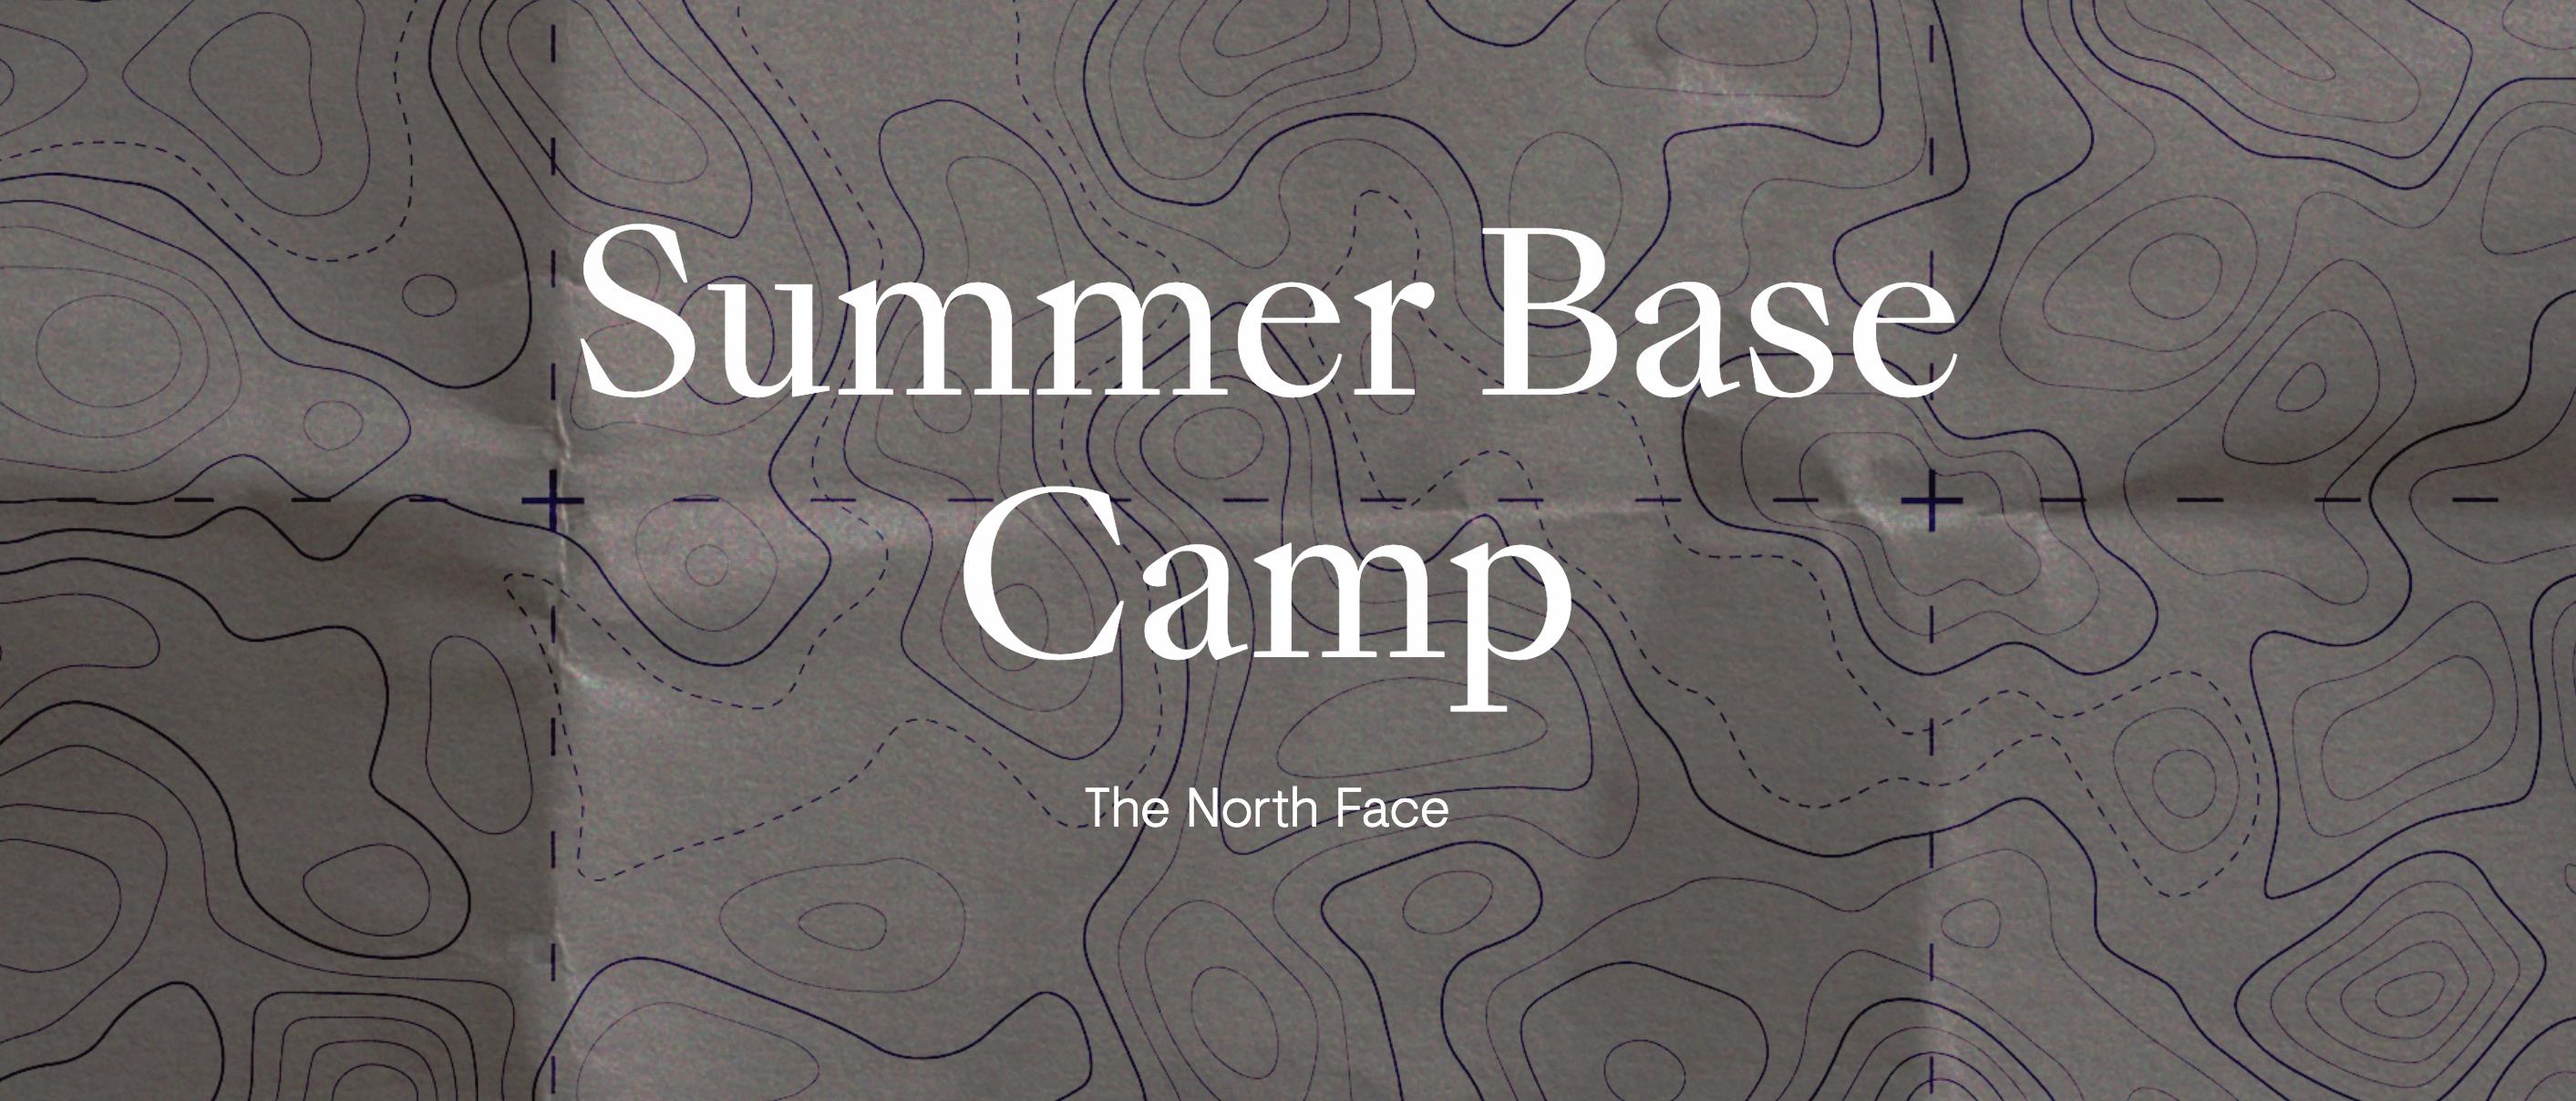 The North Face - Summer Base Camp